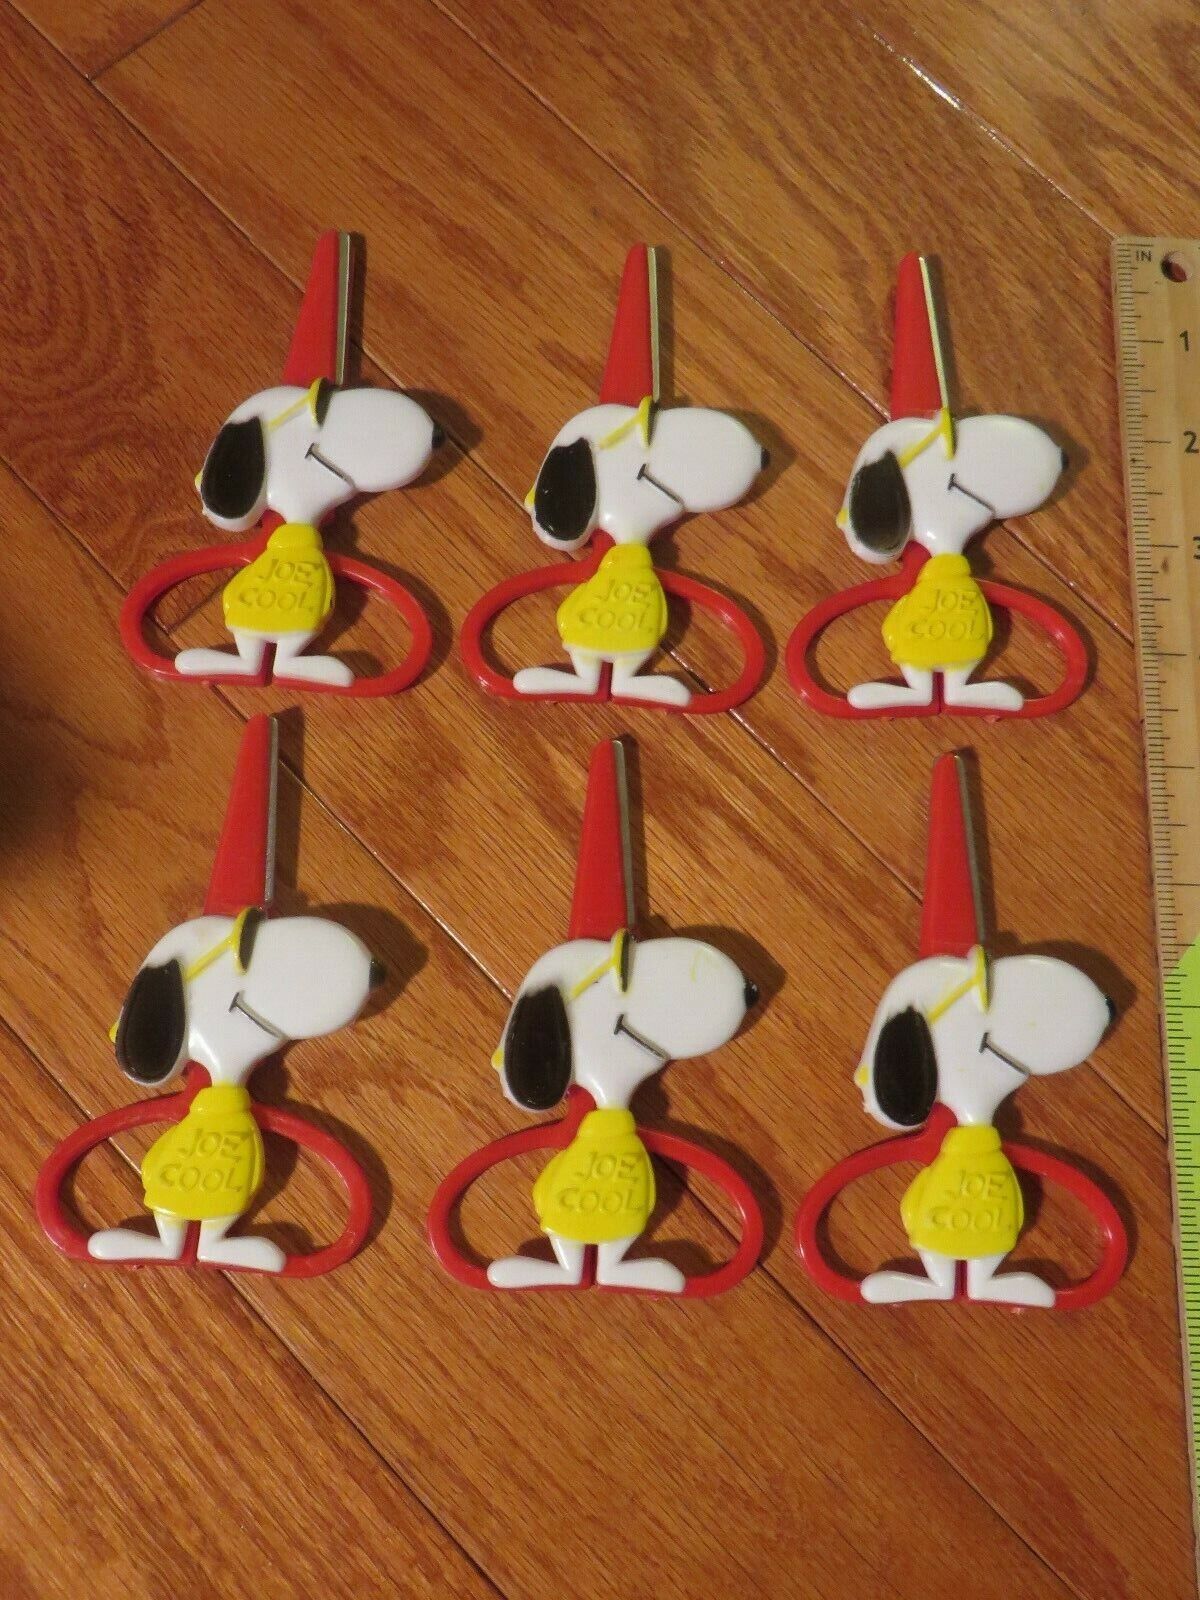 6 sets RARE VINTAGE PEANUTS SNOOPY JOE COOL SAFETY SCISSORS BUTTERFLY 1970s